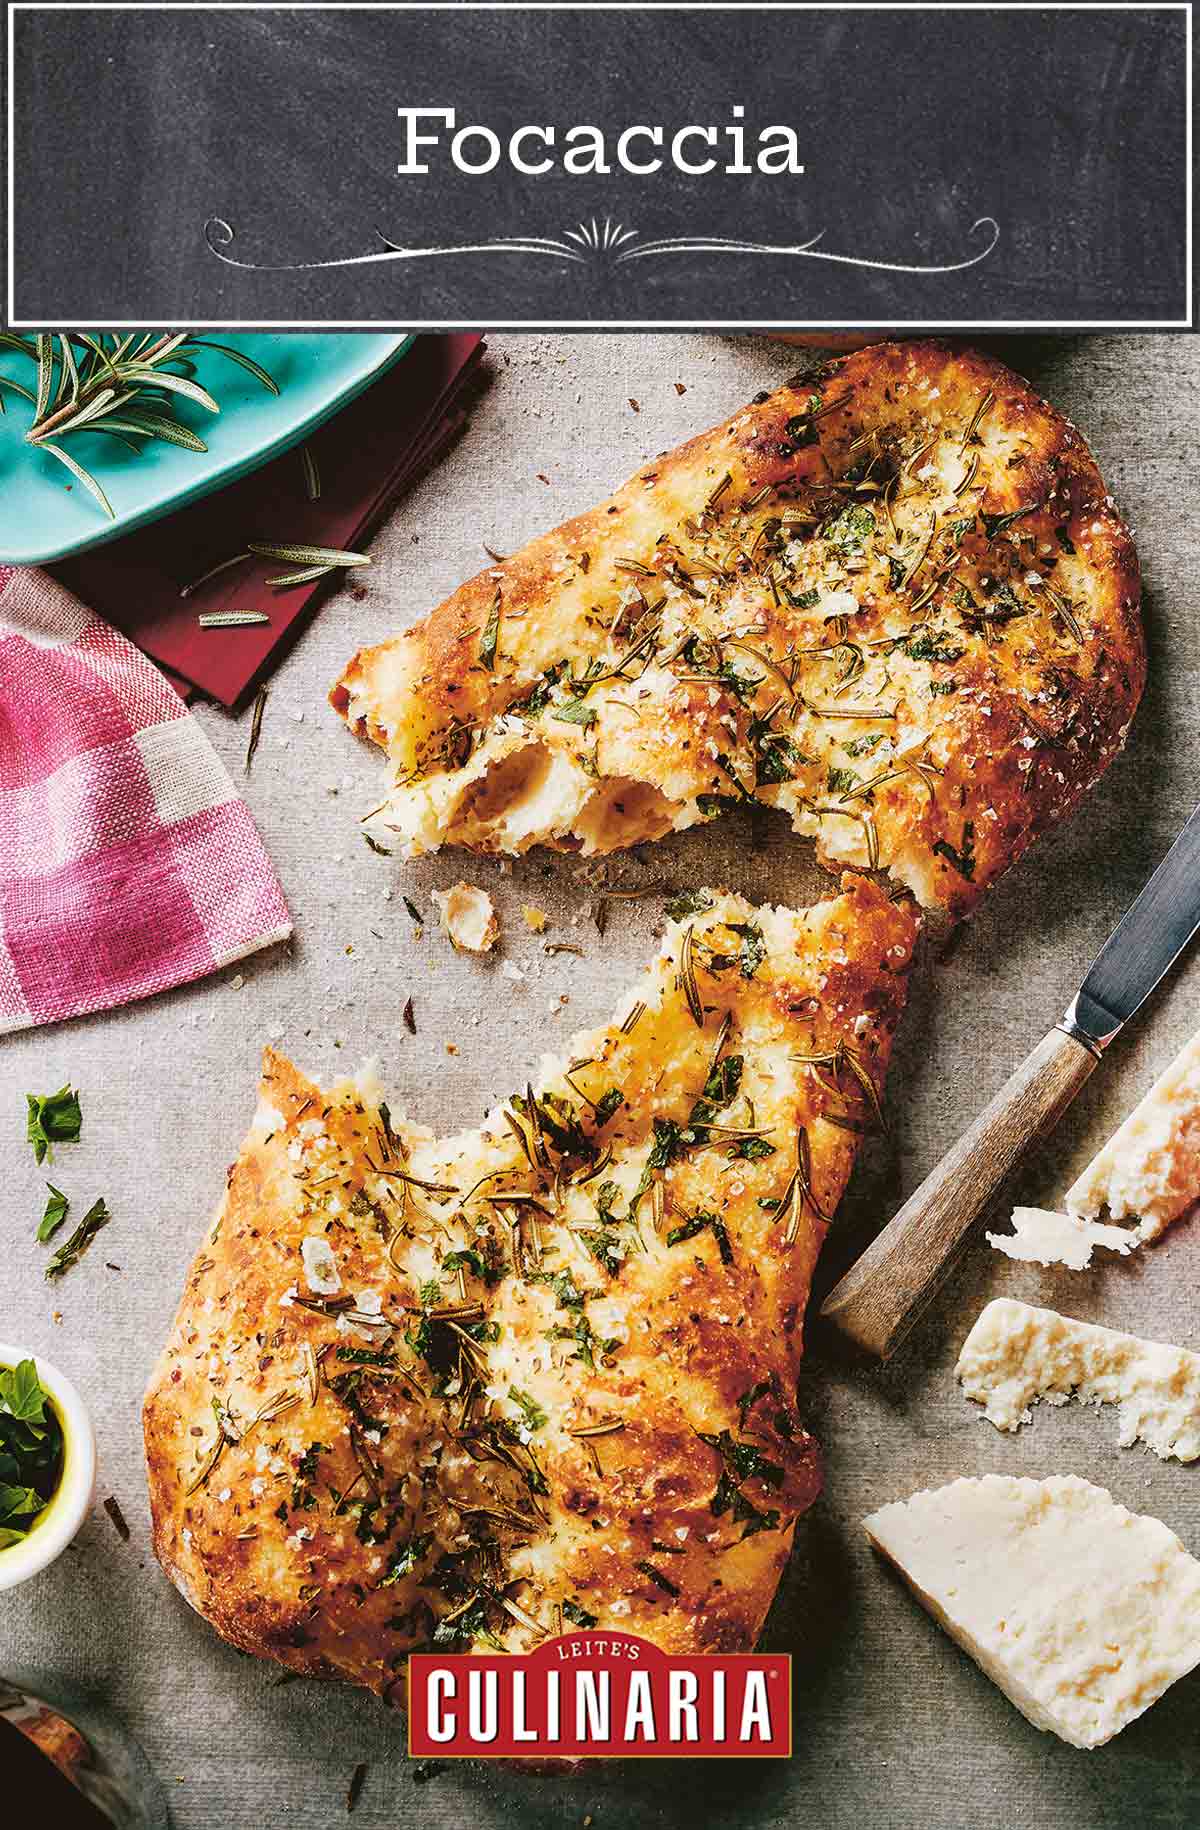 A torn loaf of focaccia with herbs and salt and sprigs of rosemary, a knife, and a hunk of pecorino on the side.